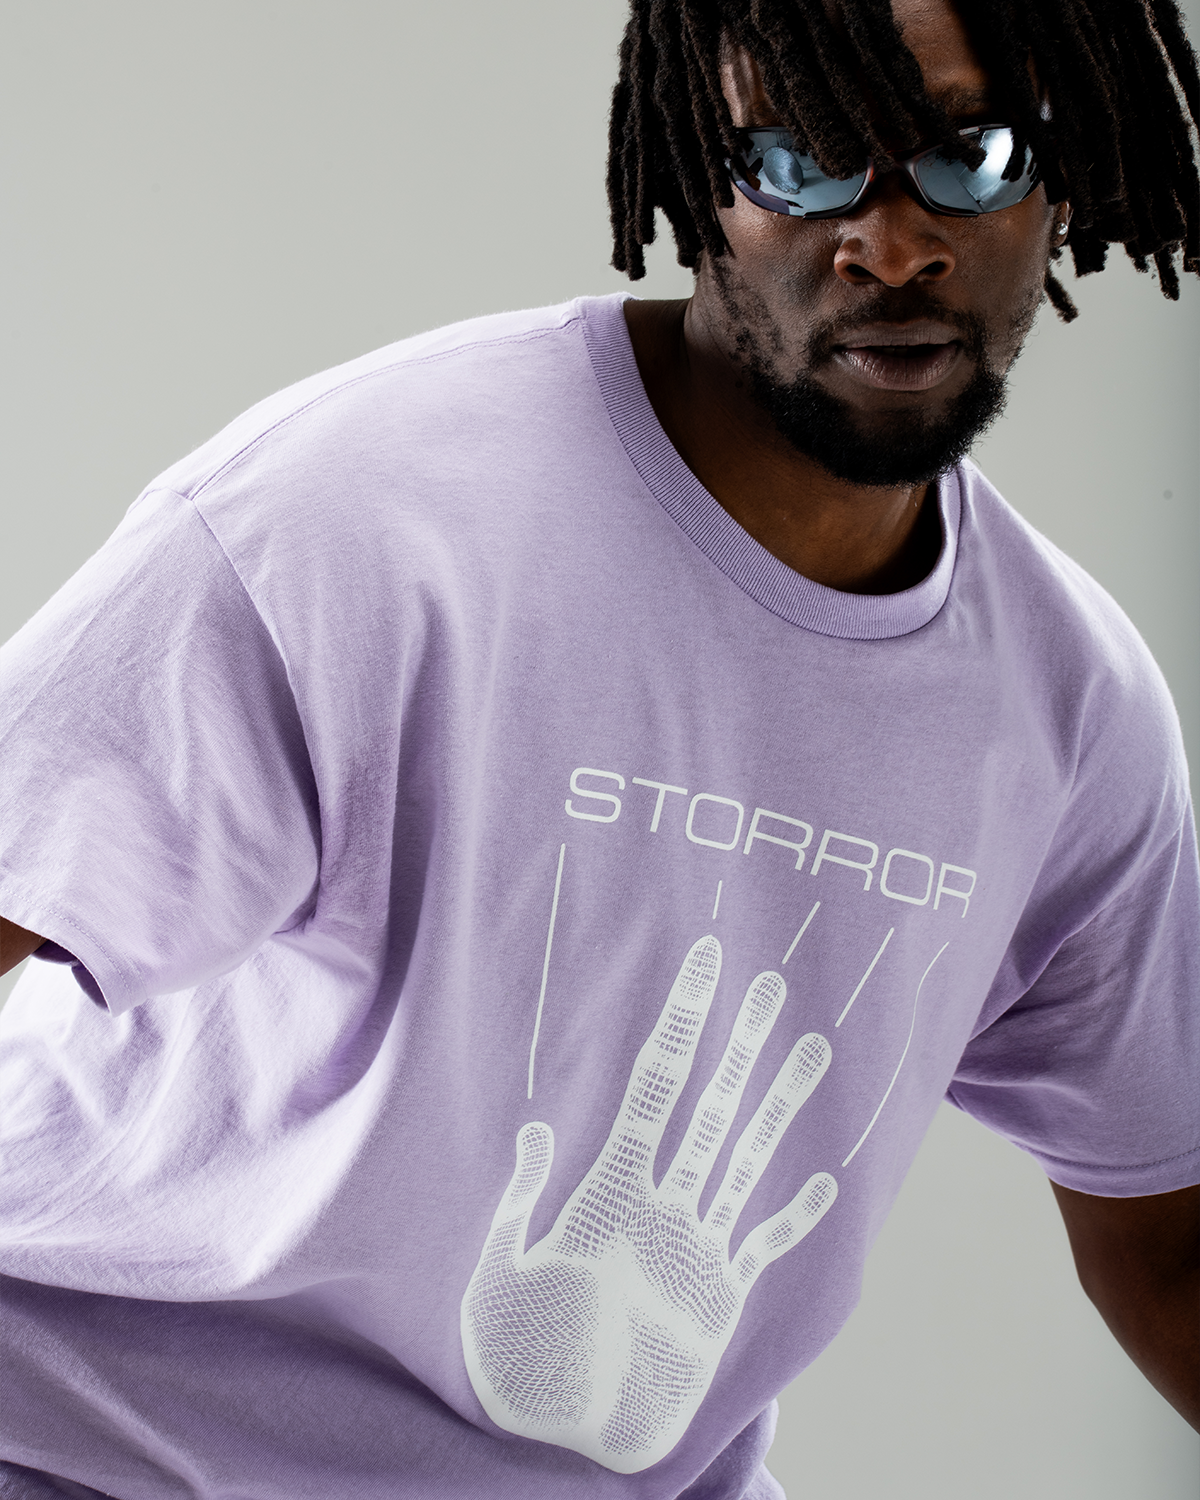 HAND T-SHIRT | STORROR | parkour clothing & technical sportswear